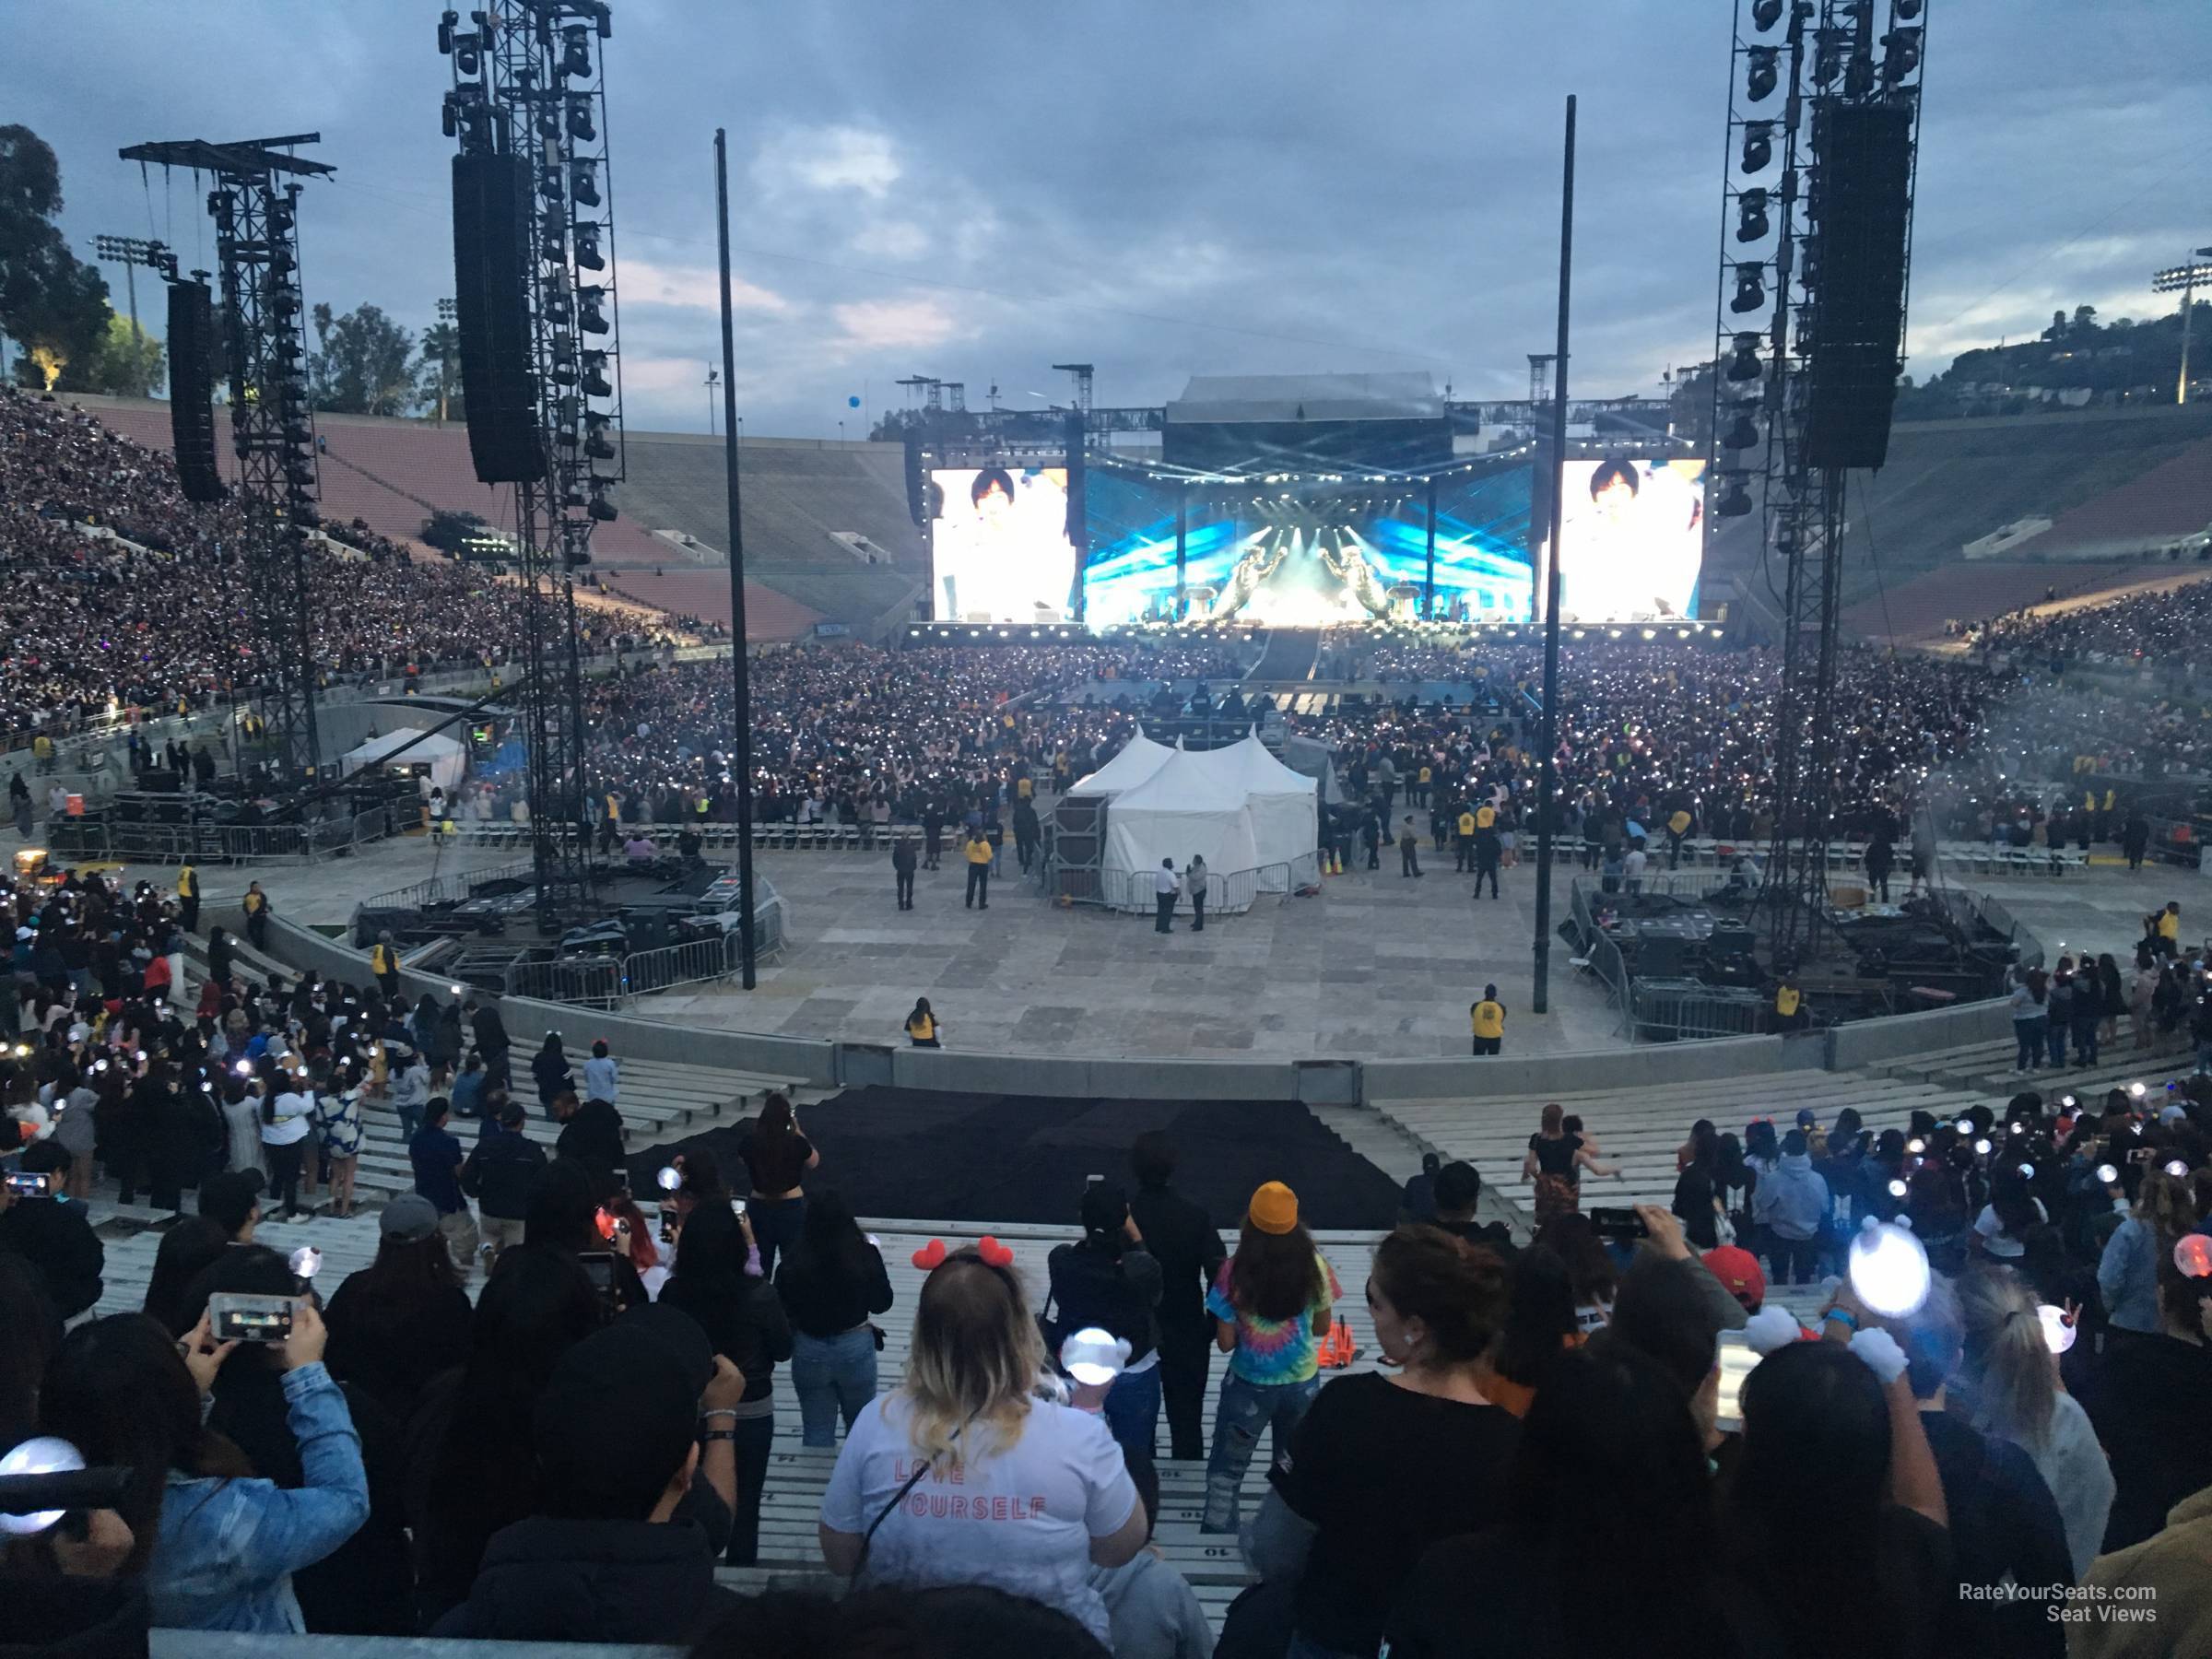 section 12, row 30 seat view  for concert - rose bowl stadium